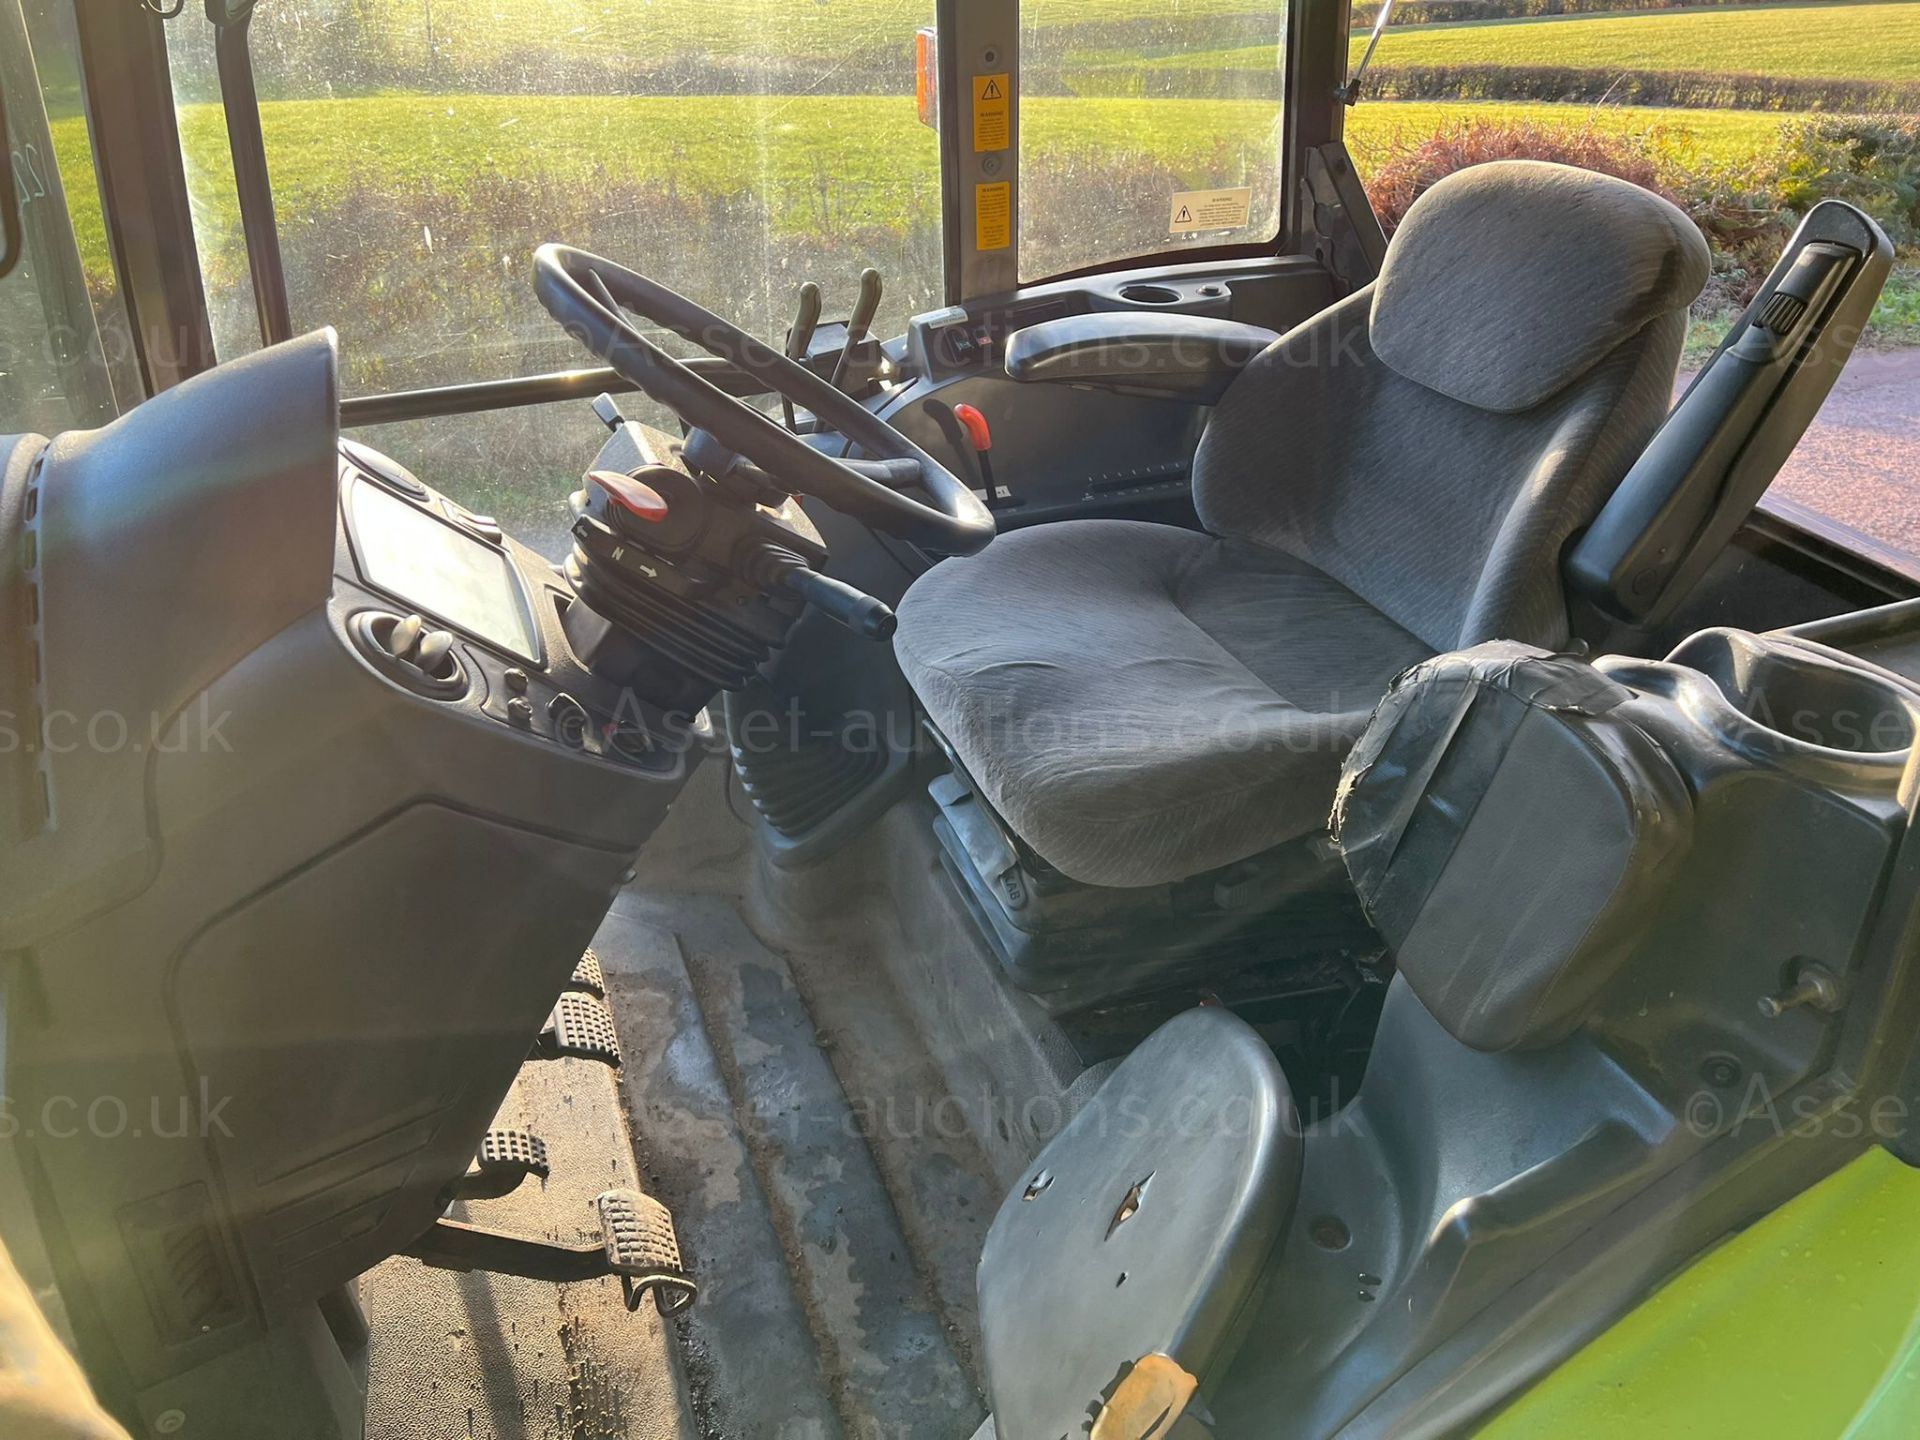 2006 CLAAS CLELTIS 426 RX 72hp 4WD TRACTOR, RUNS AND DRIVES, FULLY GLASS CAB, 7622 HOURS *PLUS VAT* - Image 11 of 13